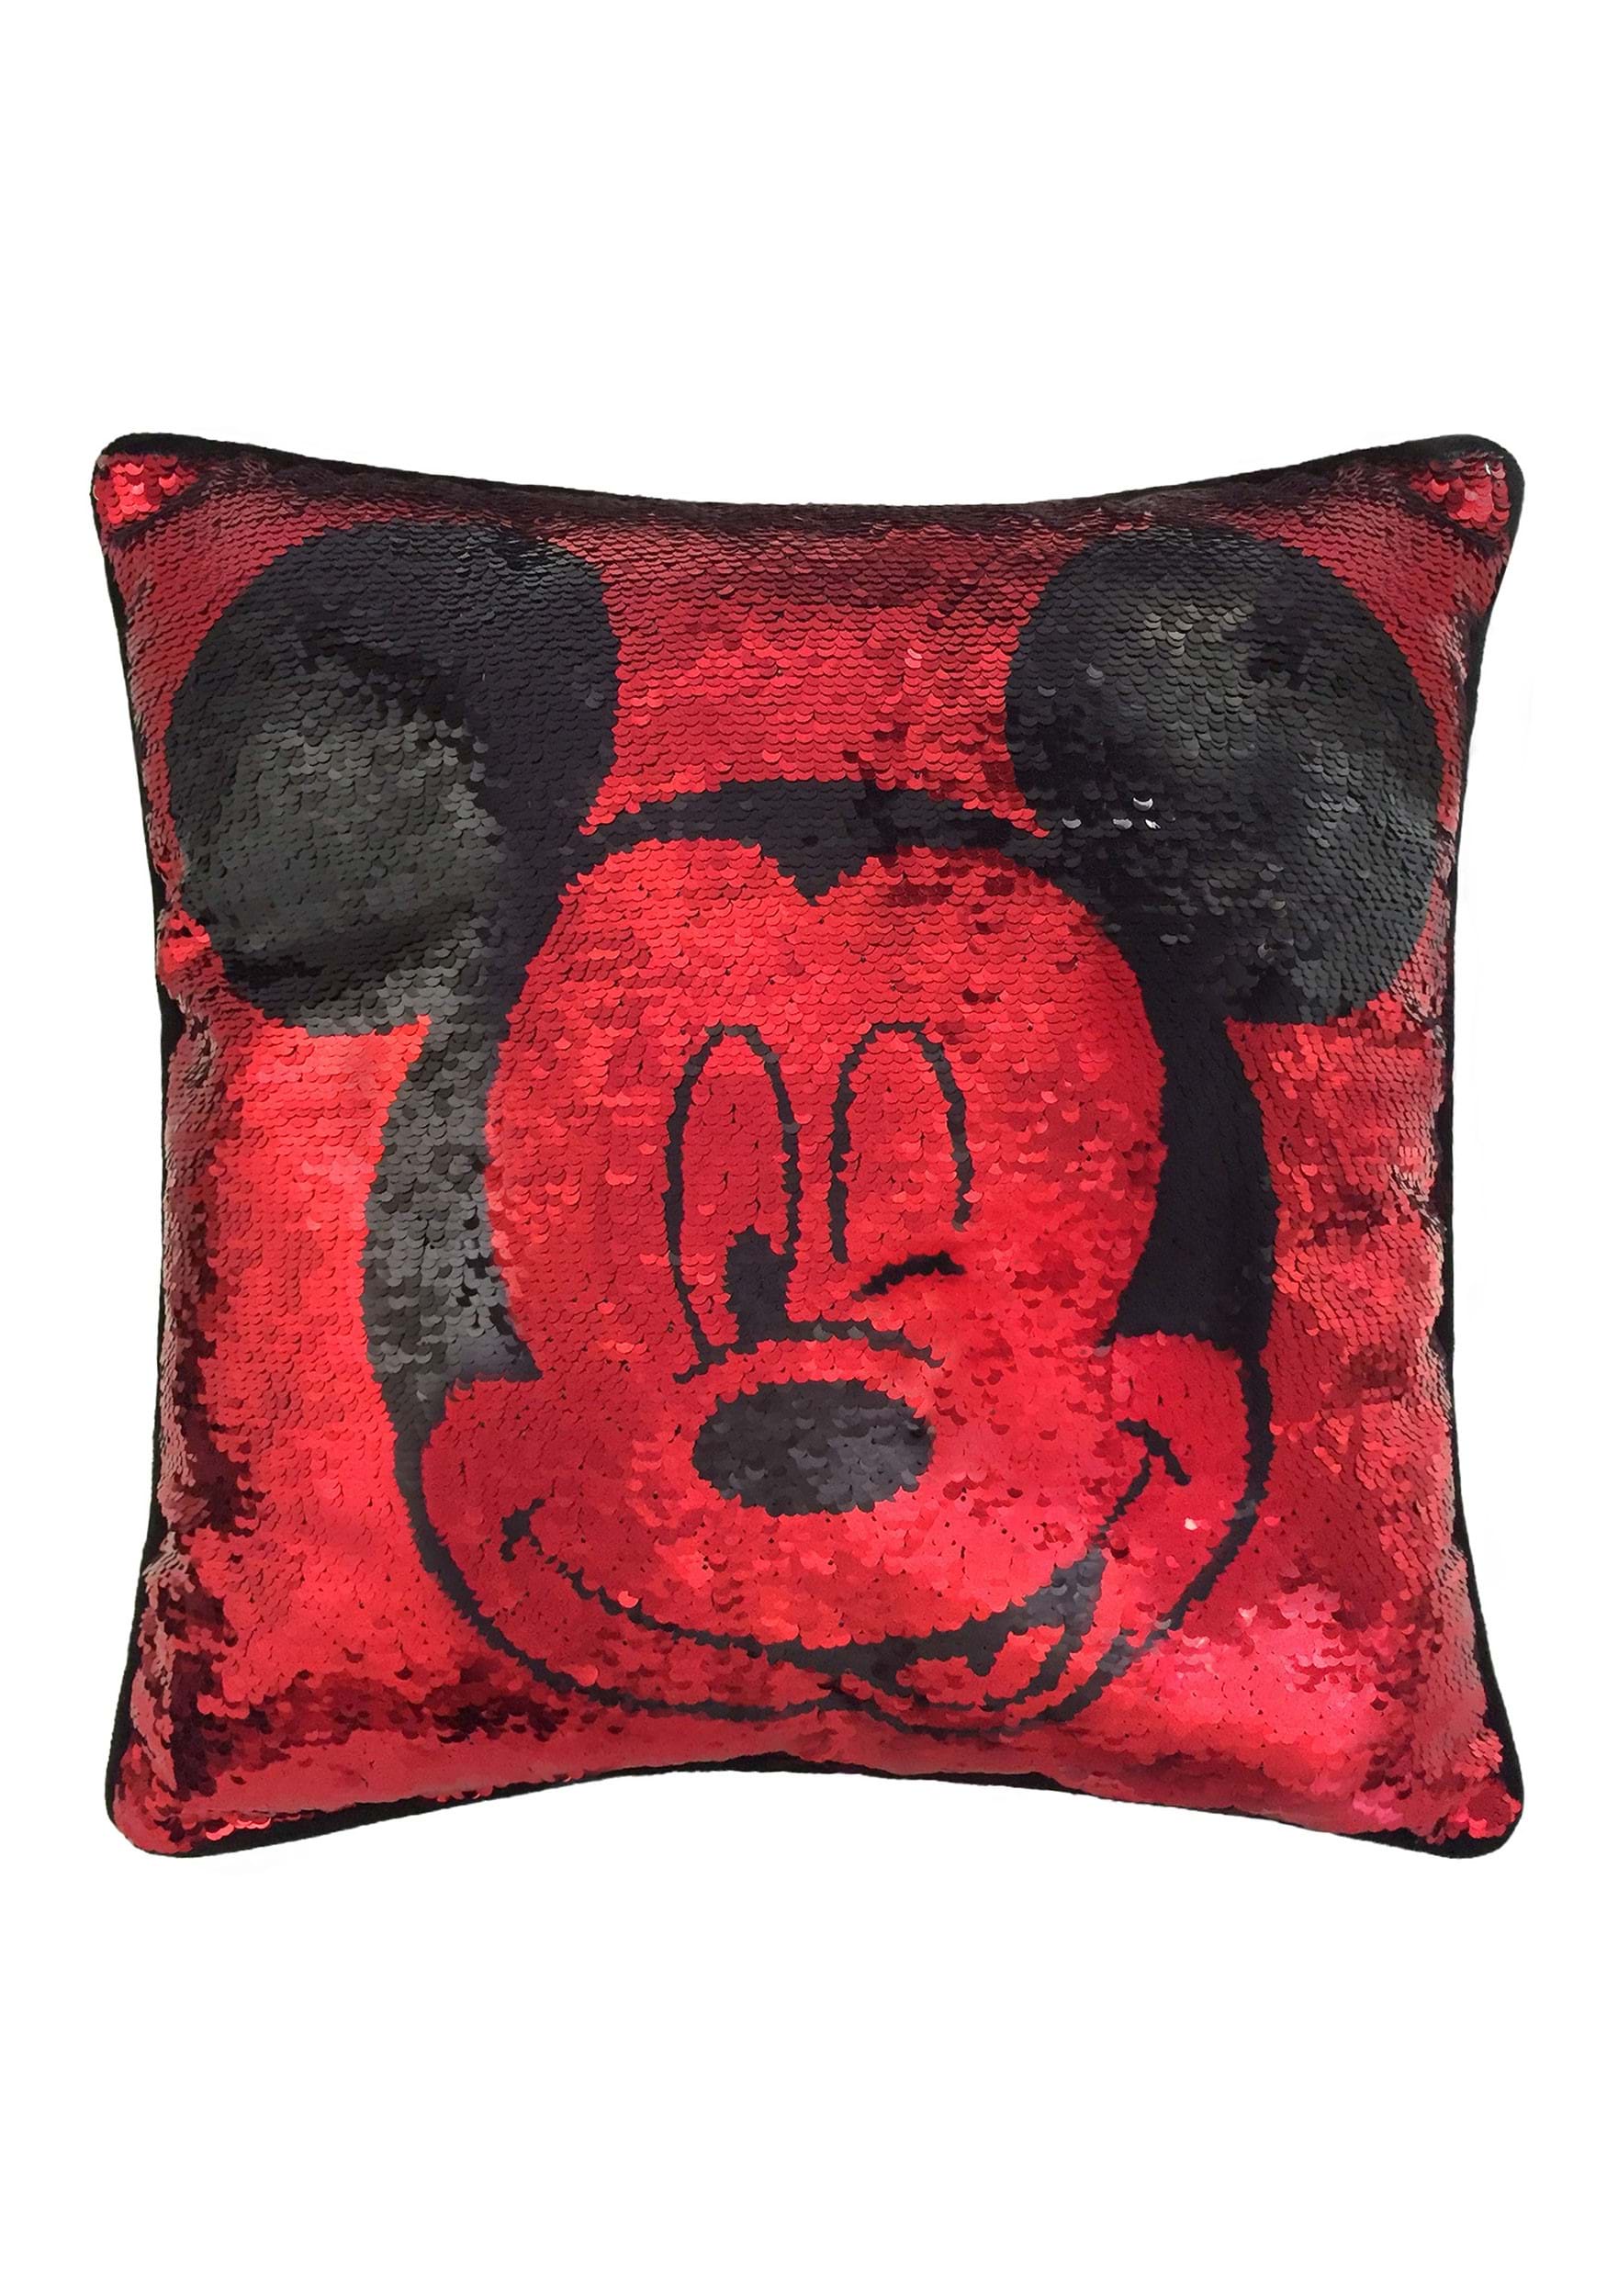 16"x16" Mickey Mouse Sequin Pillow